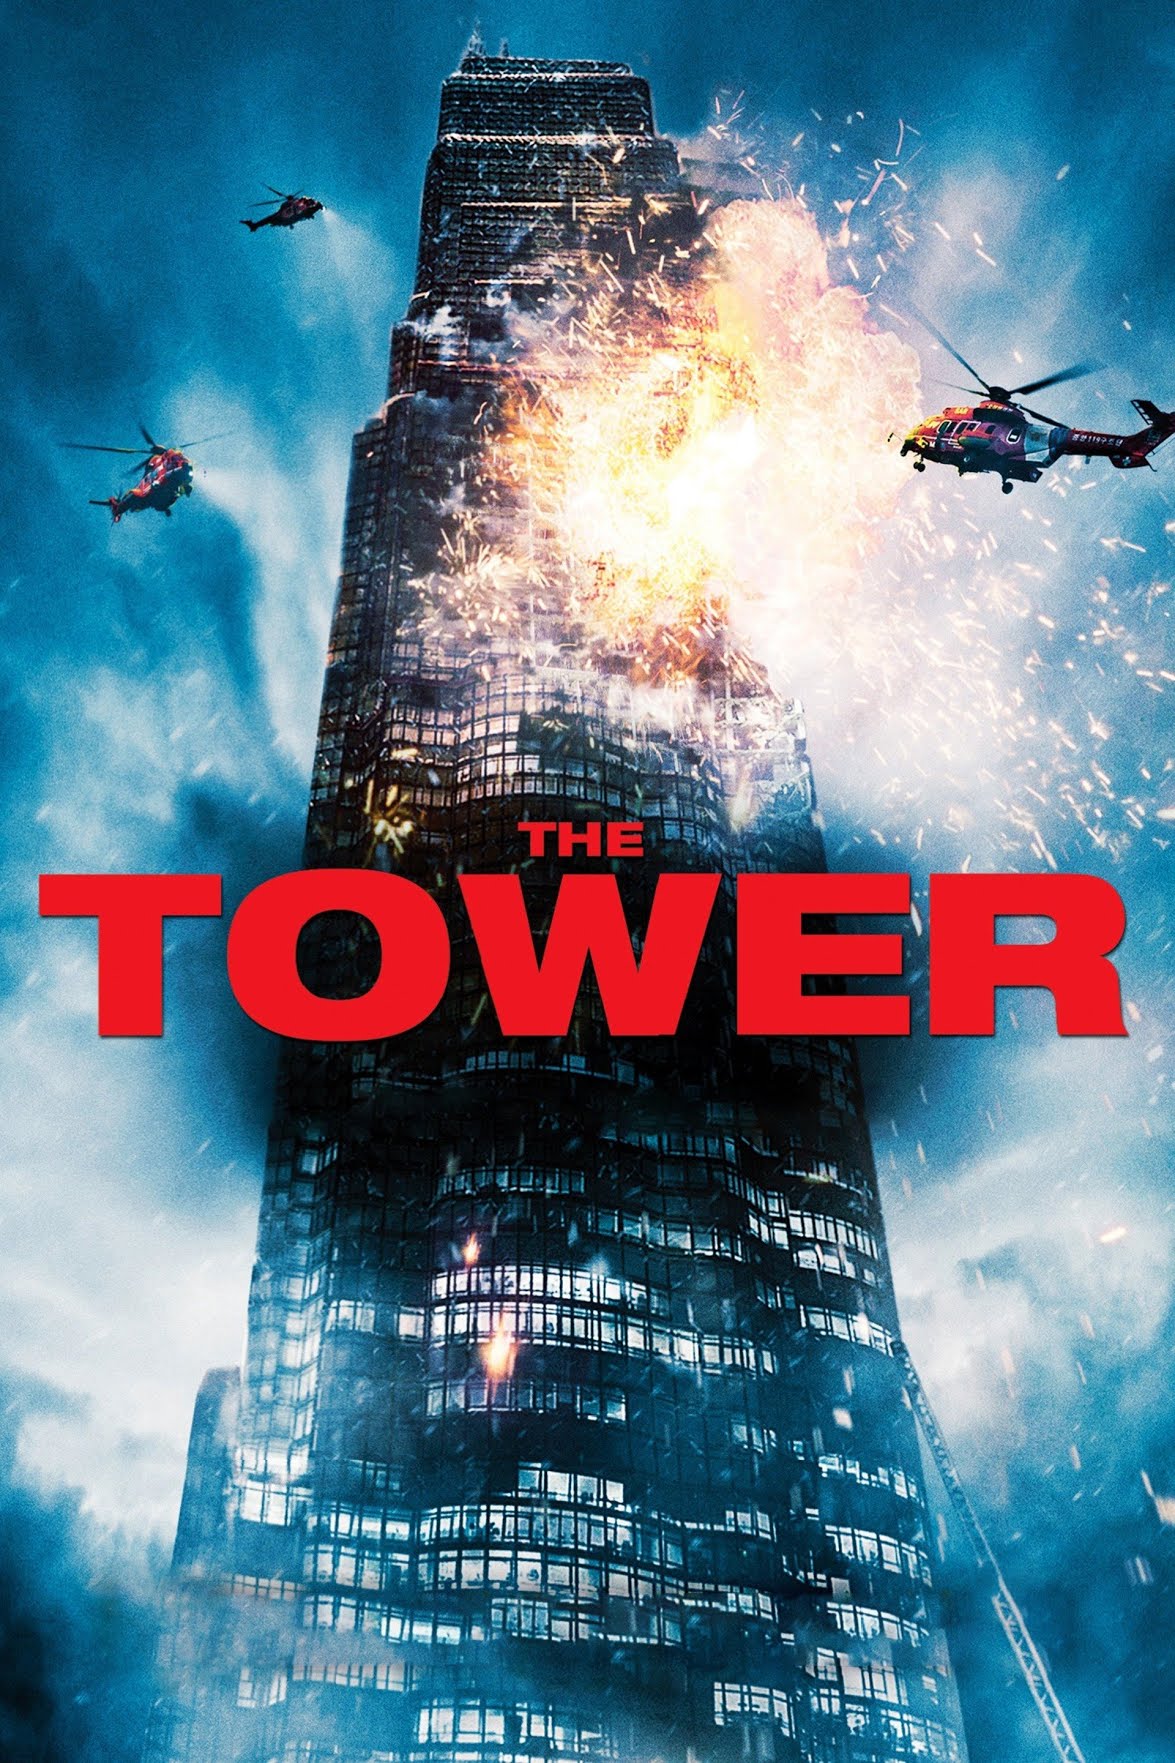 The Tower [HD] (2013)